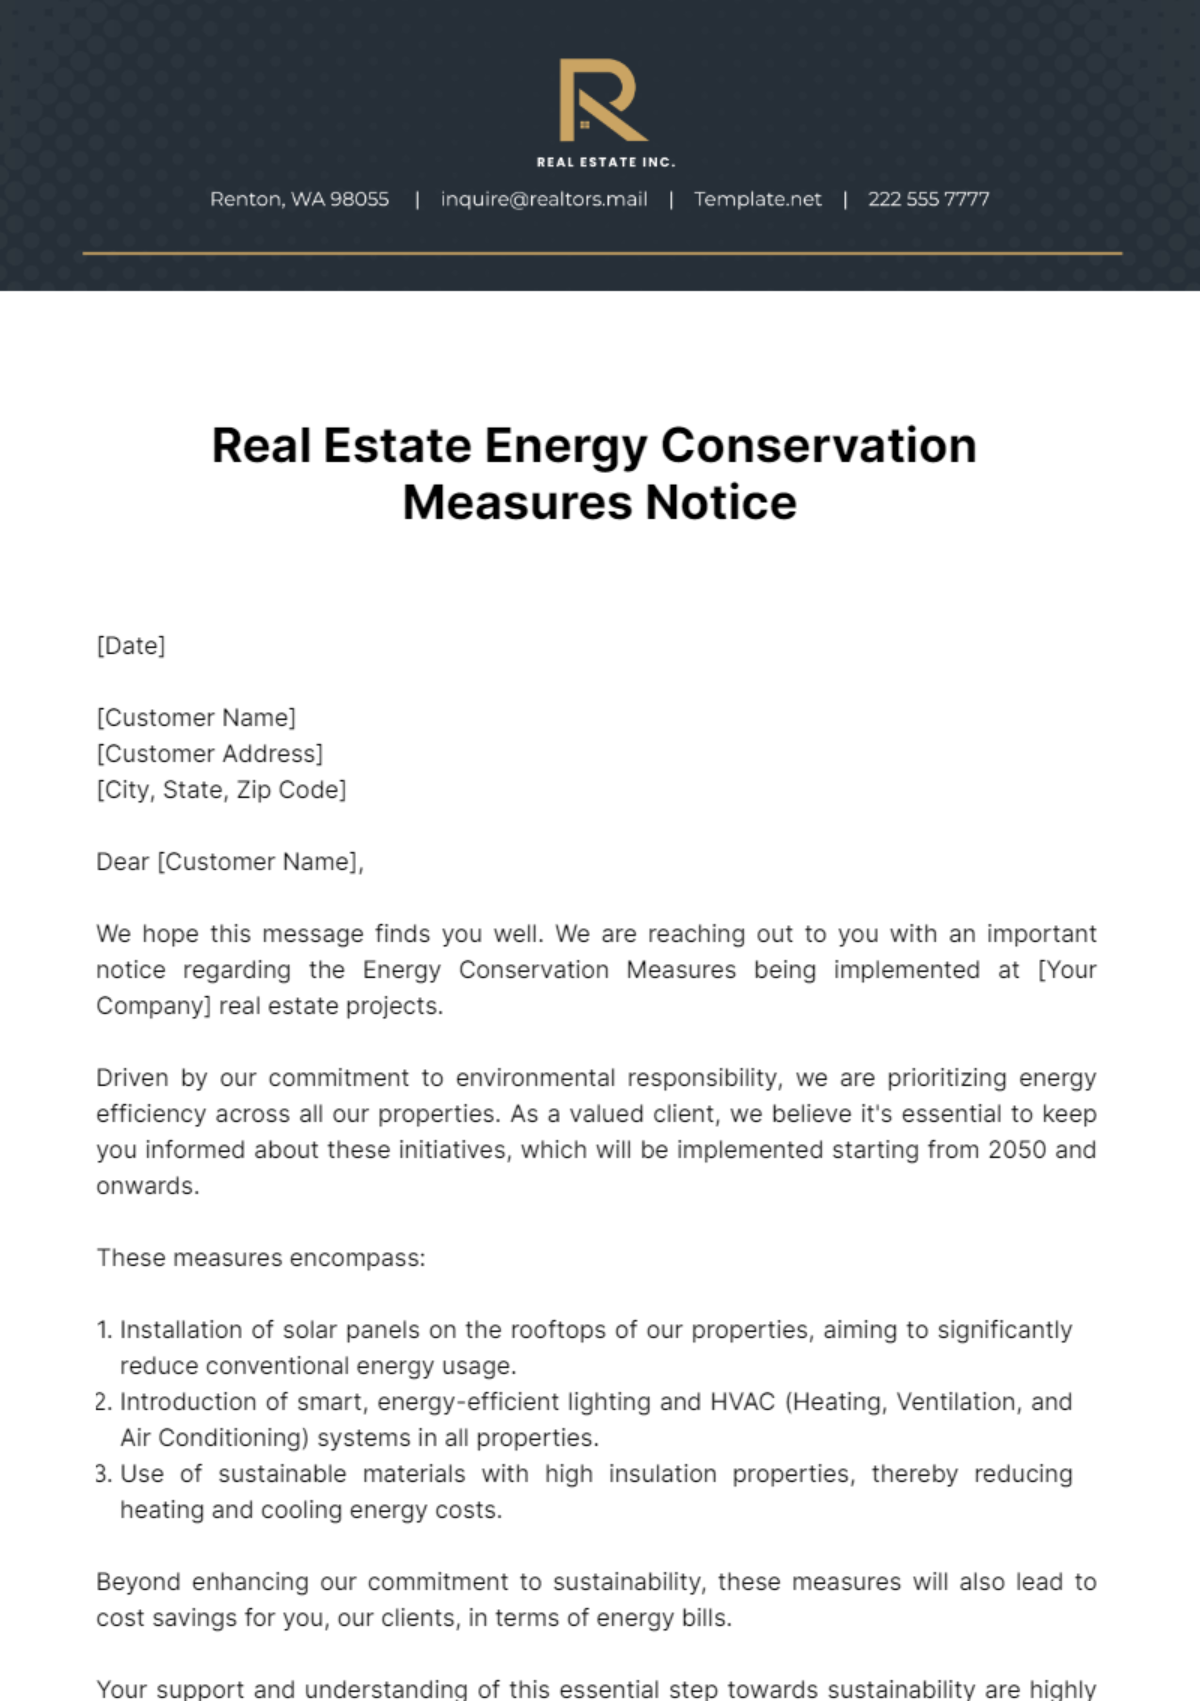 Real Estate Energy Conservation Measures Notice Template